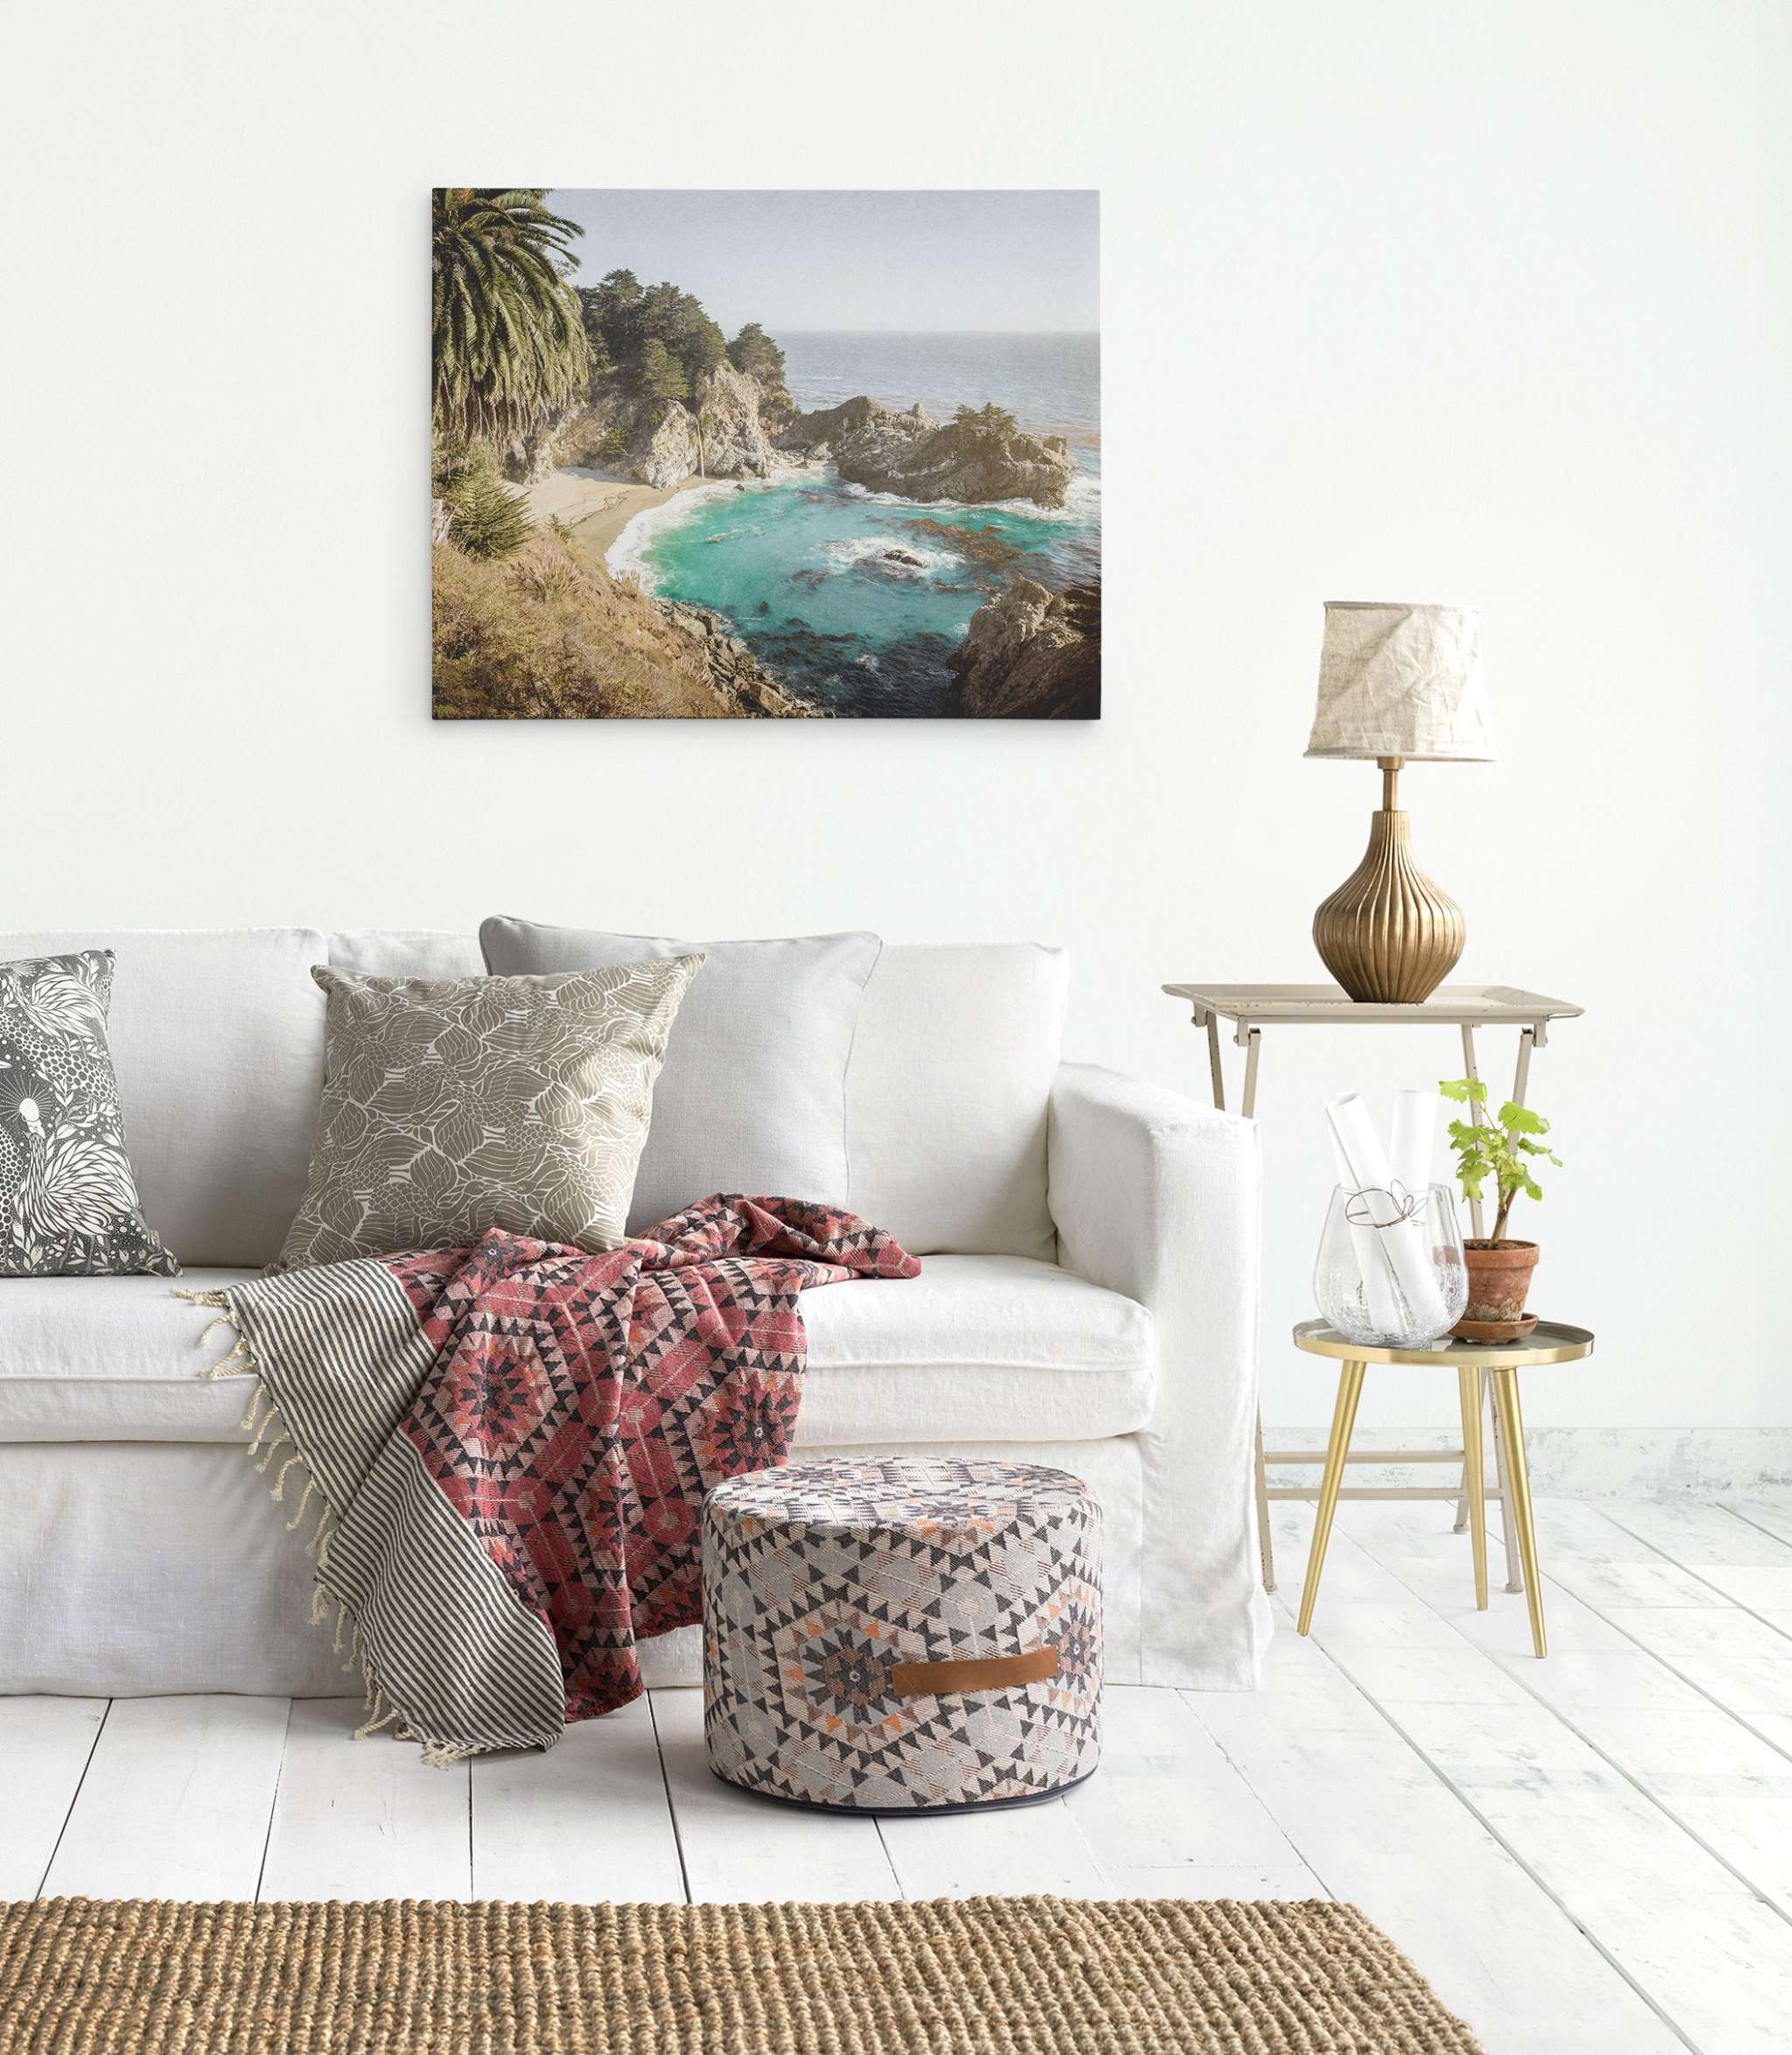 A stylish living room with a white sofa adorned with patterned cushions and a red patterned throw. A round patterned ottoman sits on a textured rug. A side table with a bottle vase, plant, and lamp is nearby. Offley Green&#39;s Big Sur Canvas Wall Art, &#39;Julia Pffeifer&#39; featuring the Pacific Coast Highway waterfall hangs above as a stunning focal point.